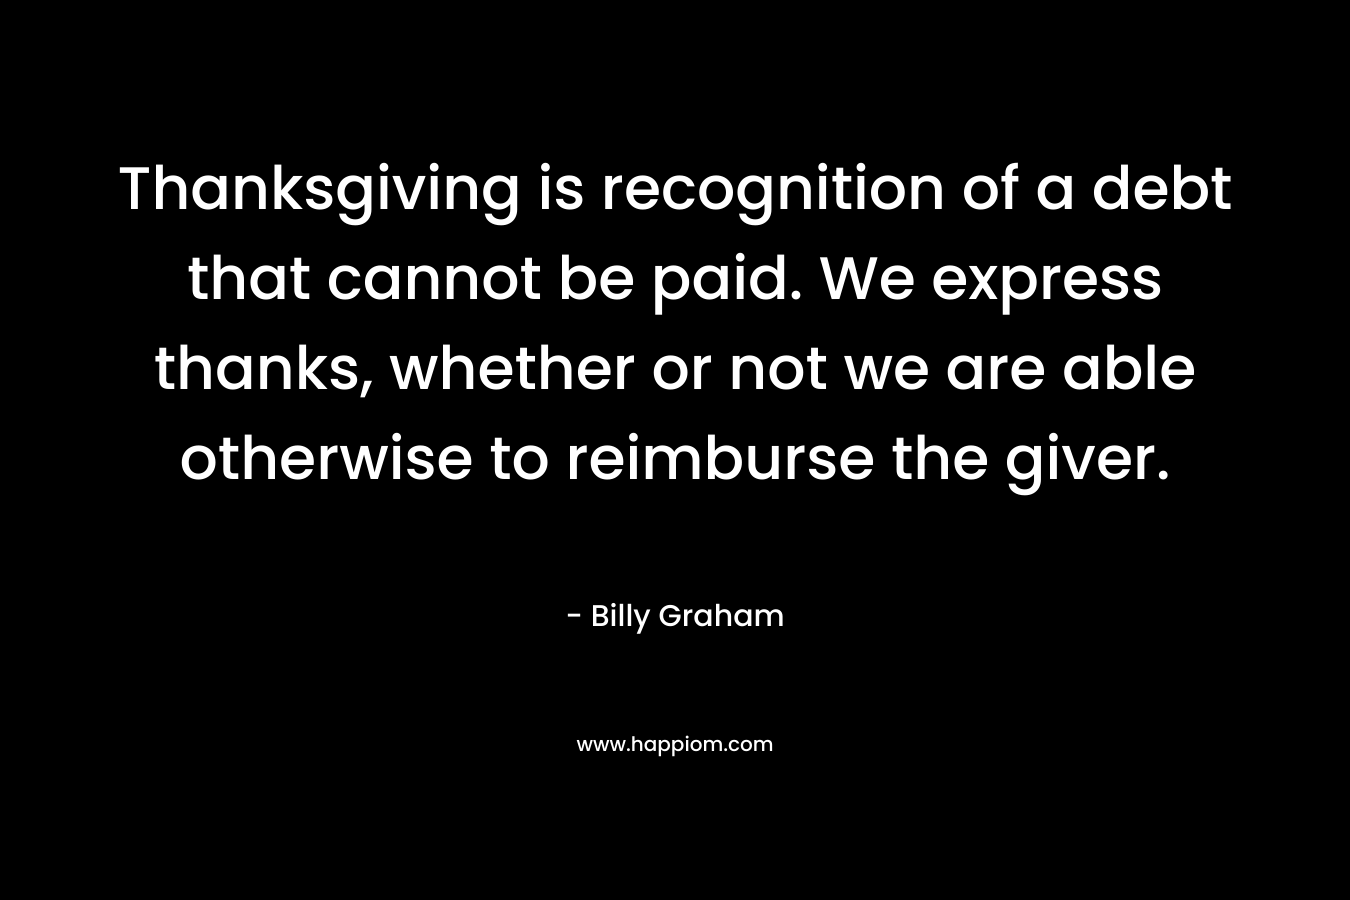 Thanksgiving is recognition of a debt that cannot be paid. We express thanks, whether or not we are able otherwise to reimburse the giver. – Billy Graham